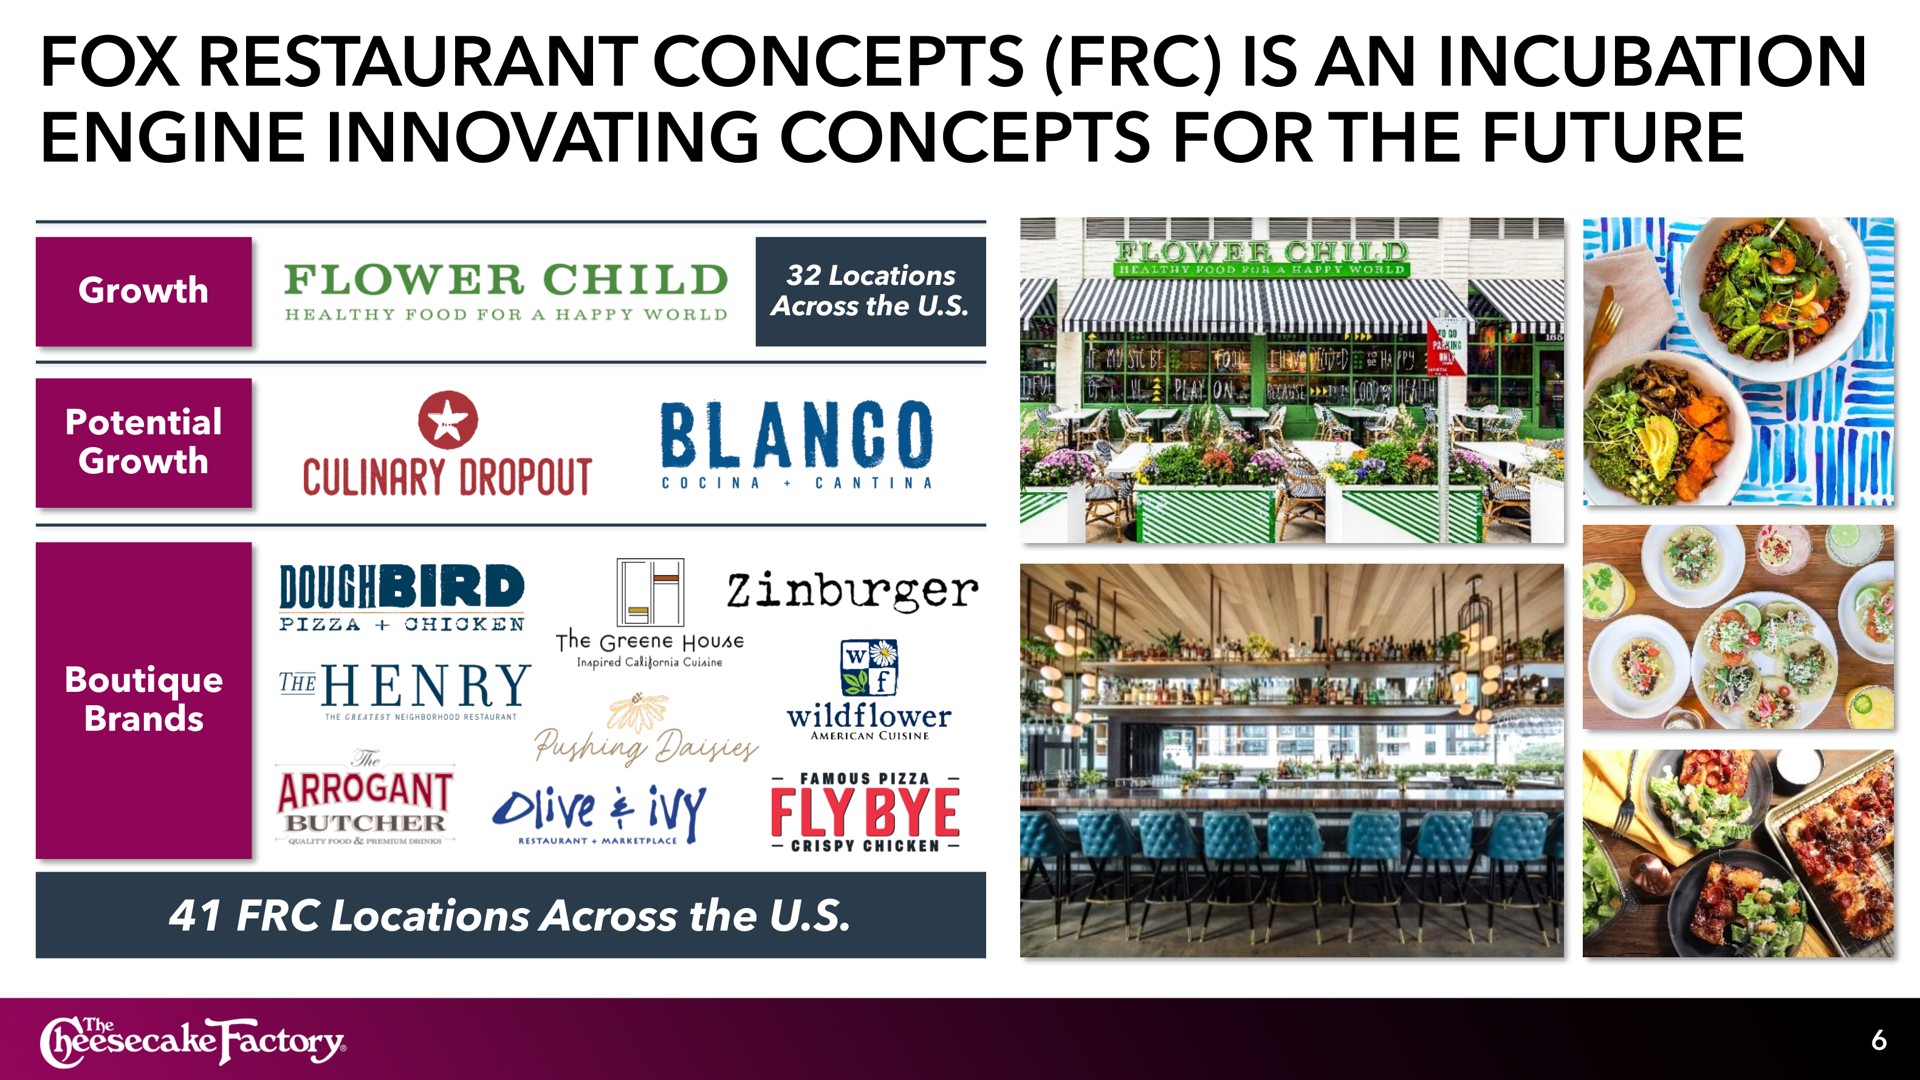 fox restaurant concepts is an incubation engine innovating concepts for the future culinary dropout a henry arrogant rie nye | Cheesecake Factory